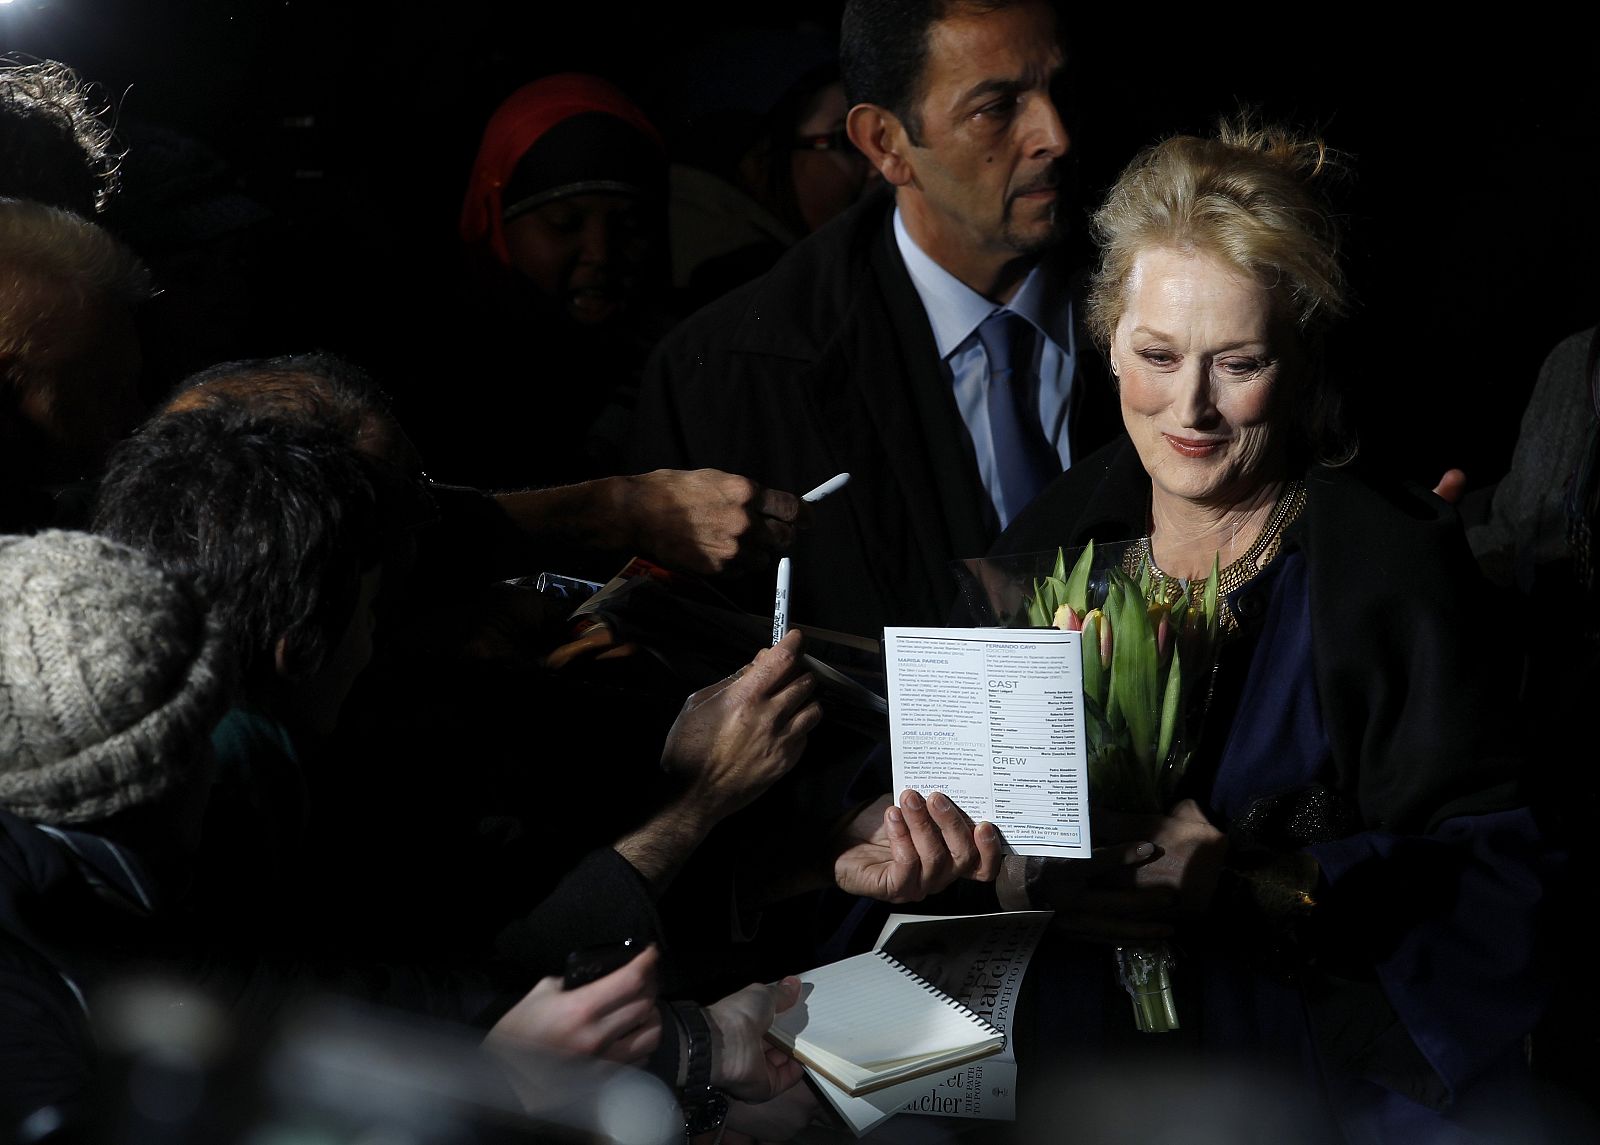 U.S. actress Meryl Streep arrives at the European premiere of "The Iron Lady" at the British Film Institute in central London